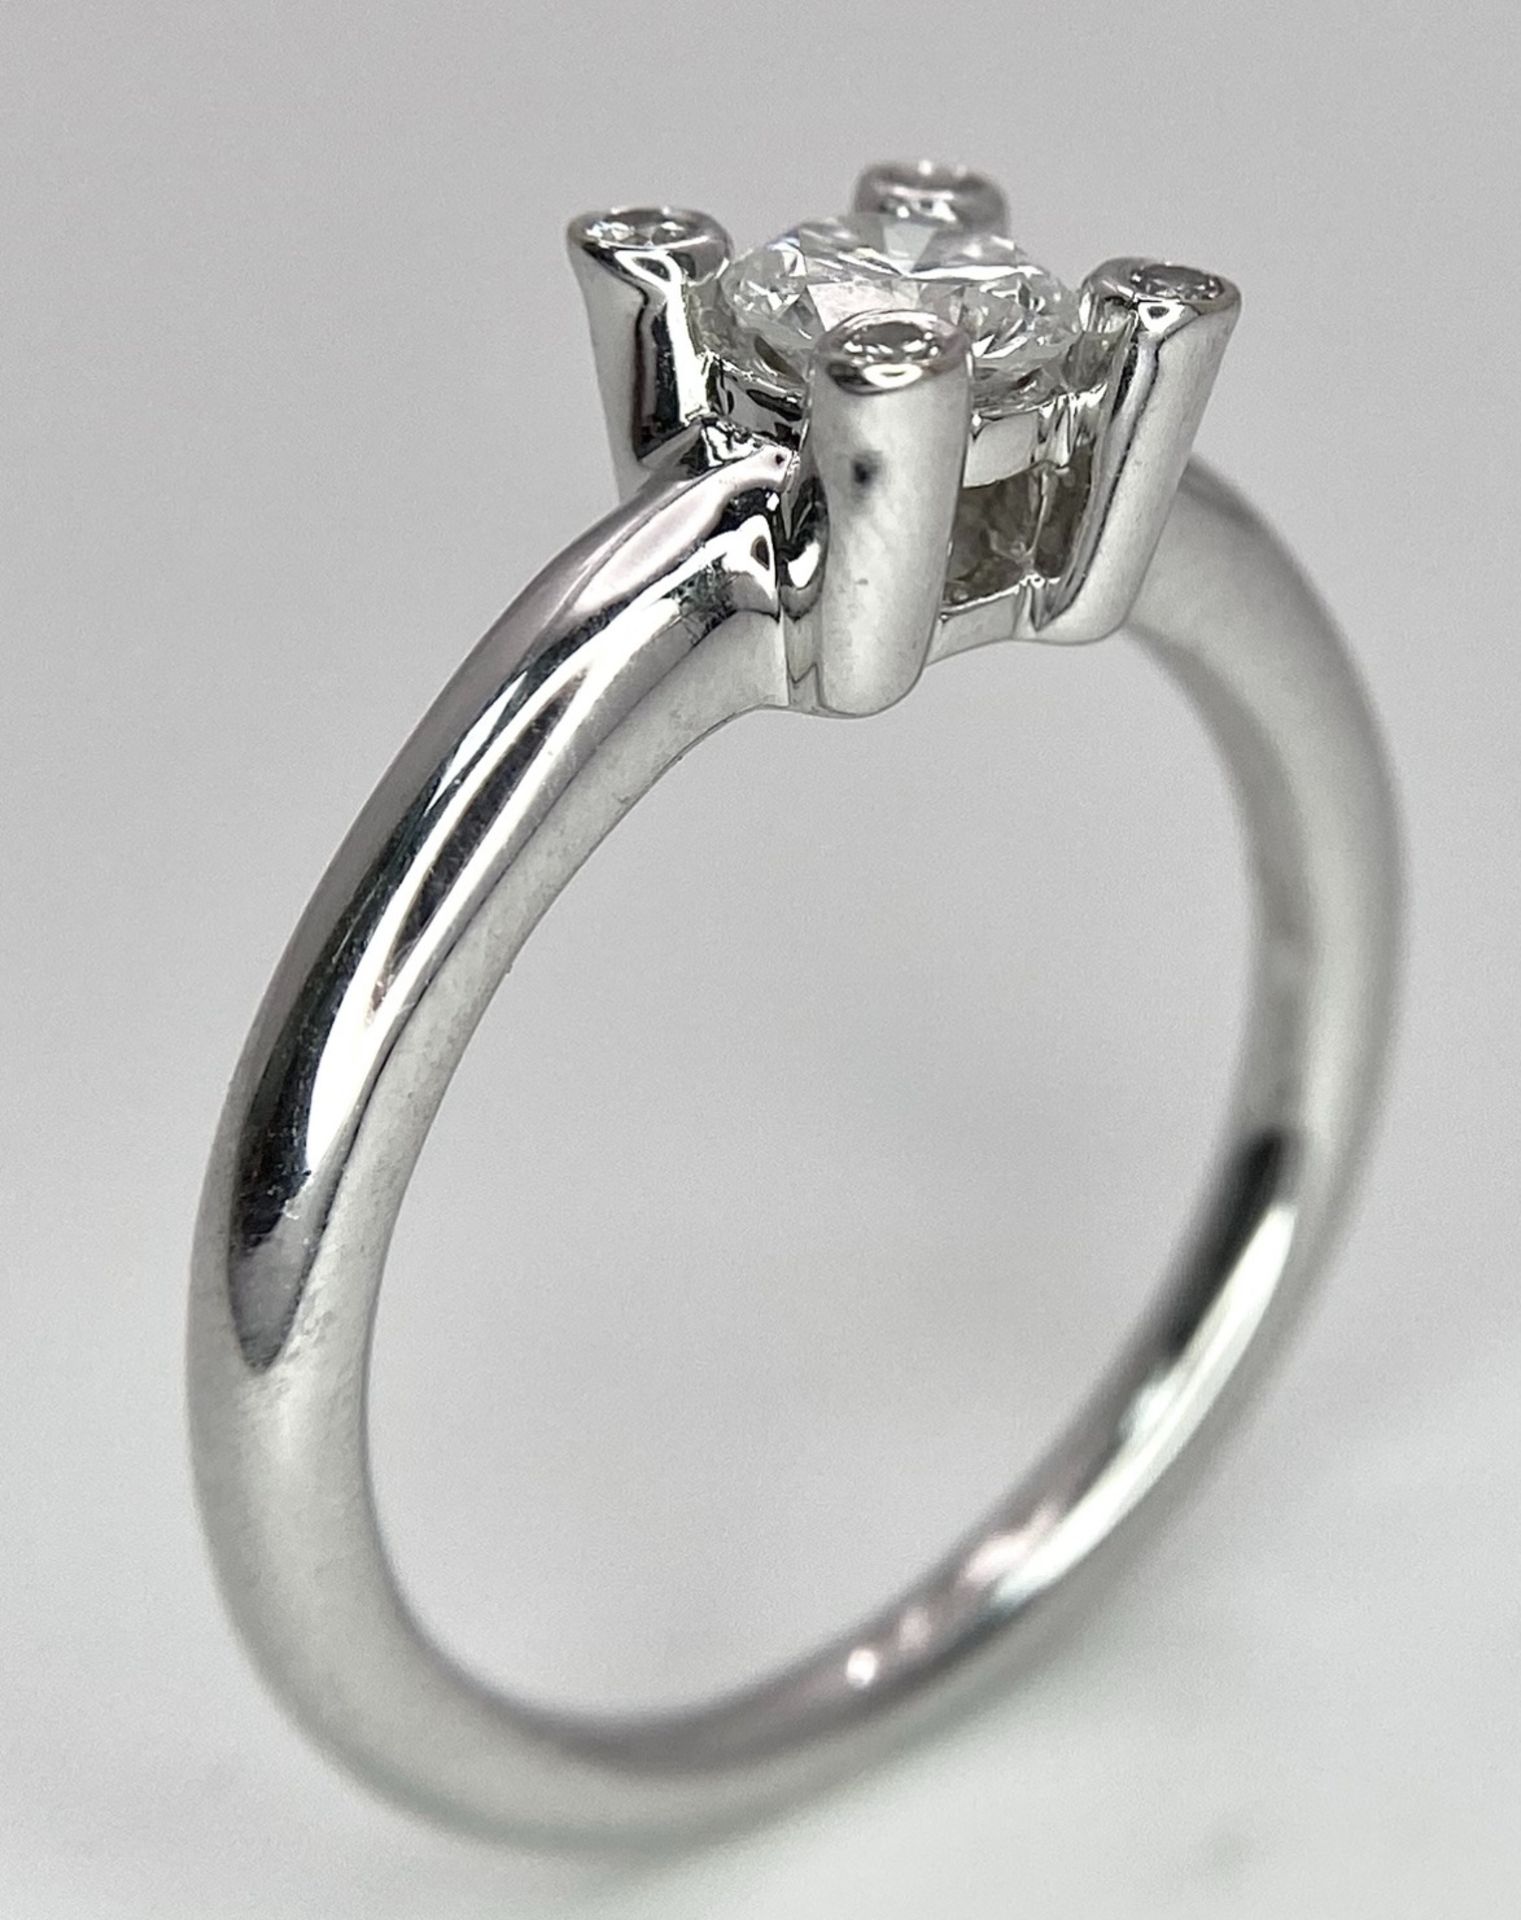 AN 18K WHITE GOLD DIAMOND SOLITAIRE RING WITH FOUR DIAMOND TURRETS - 0.50CT 4.6G. SIZE M 1/2. - Image 8 of 10